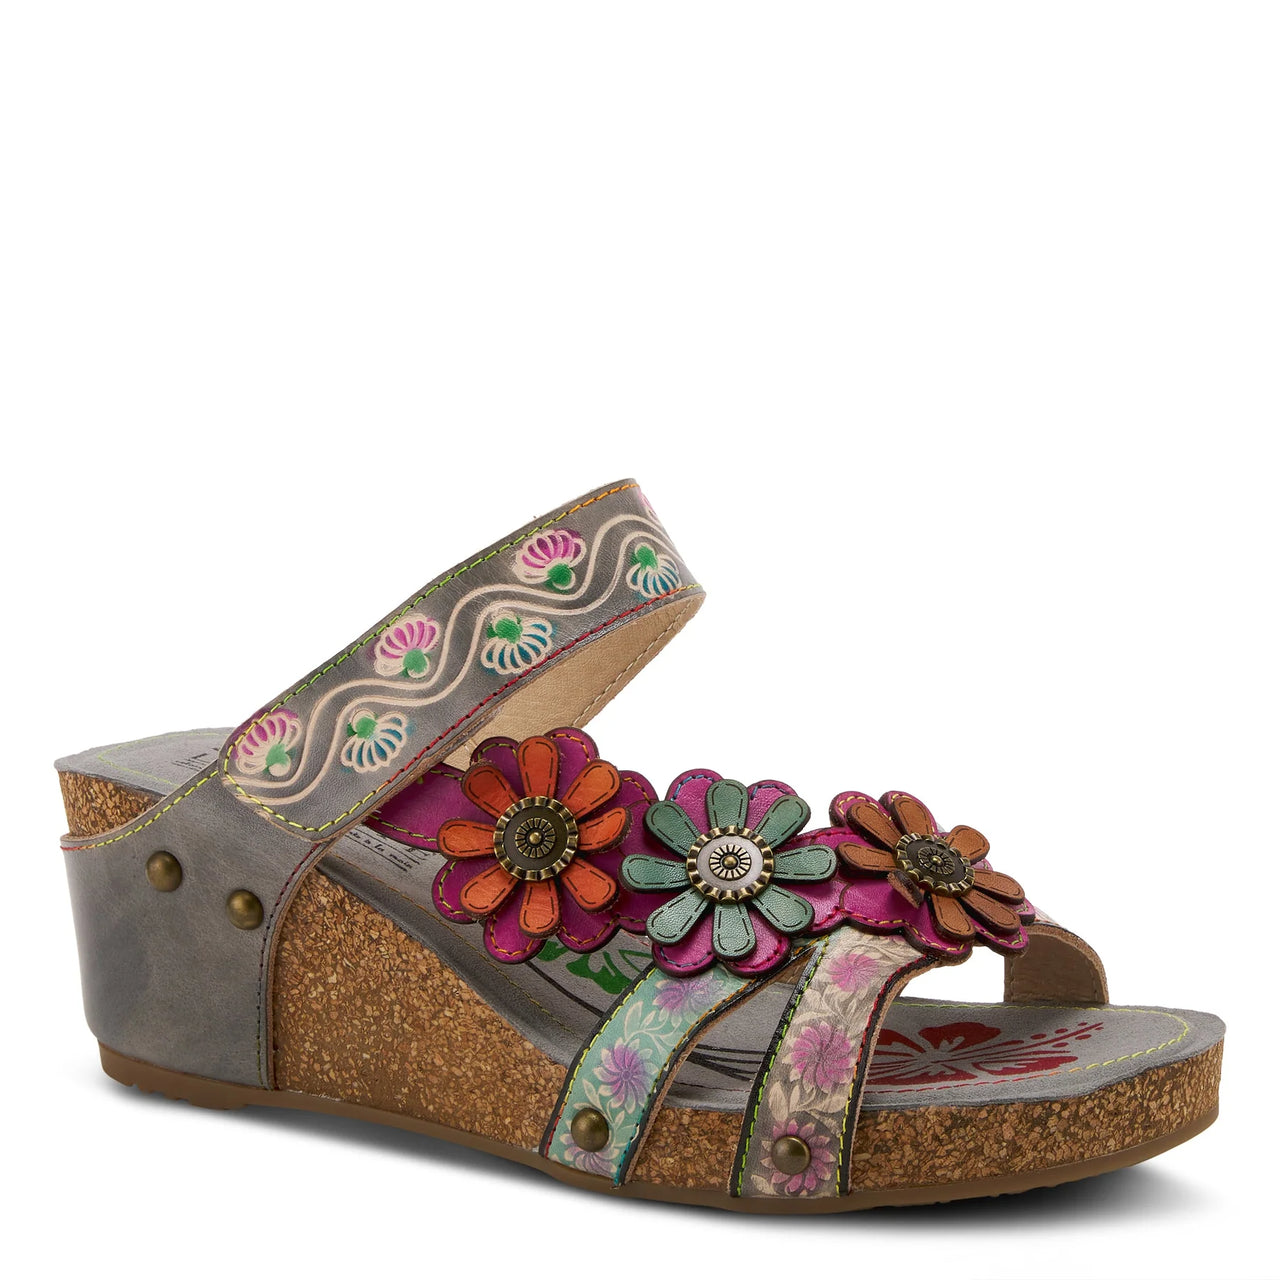 SPRING STEP DELIGHT - SPRING STEP - Sole Desire Shoes